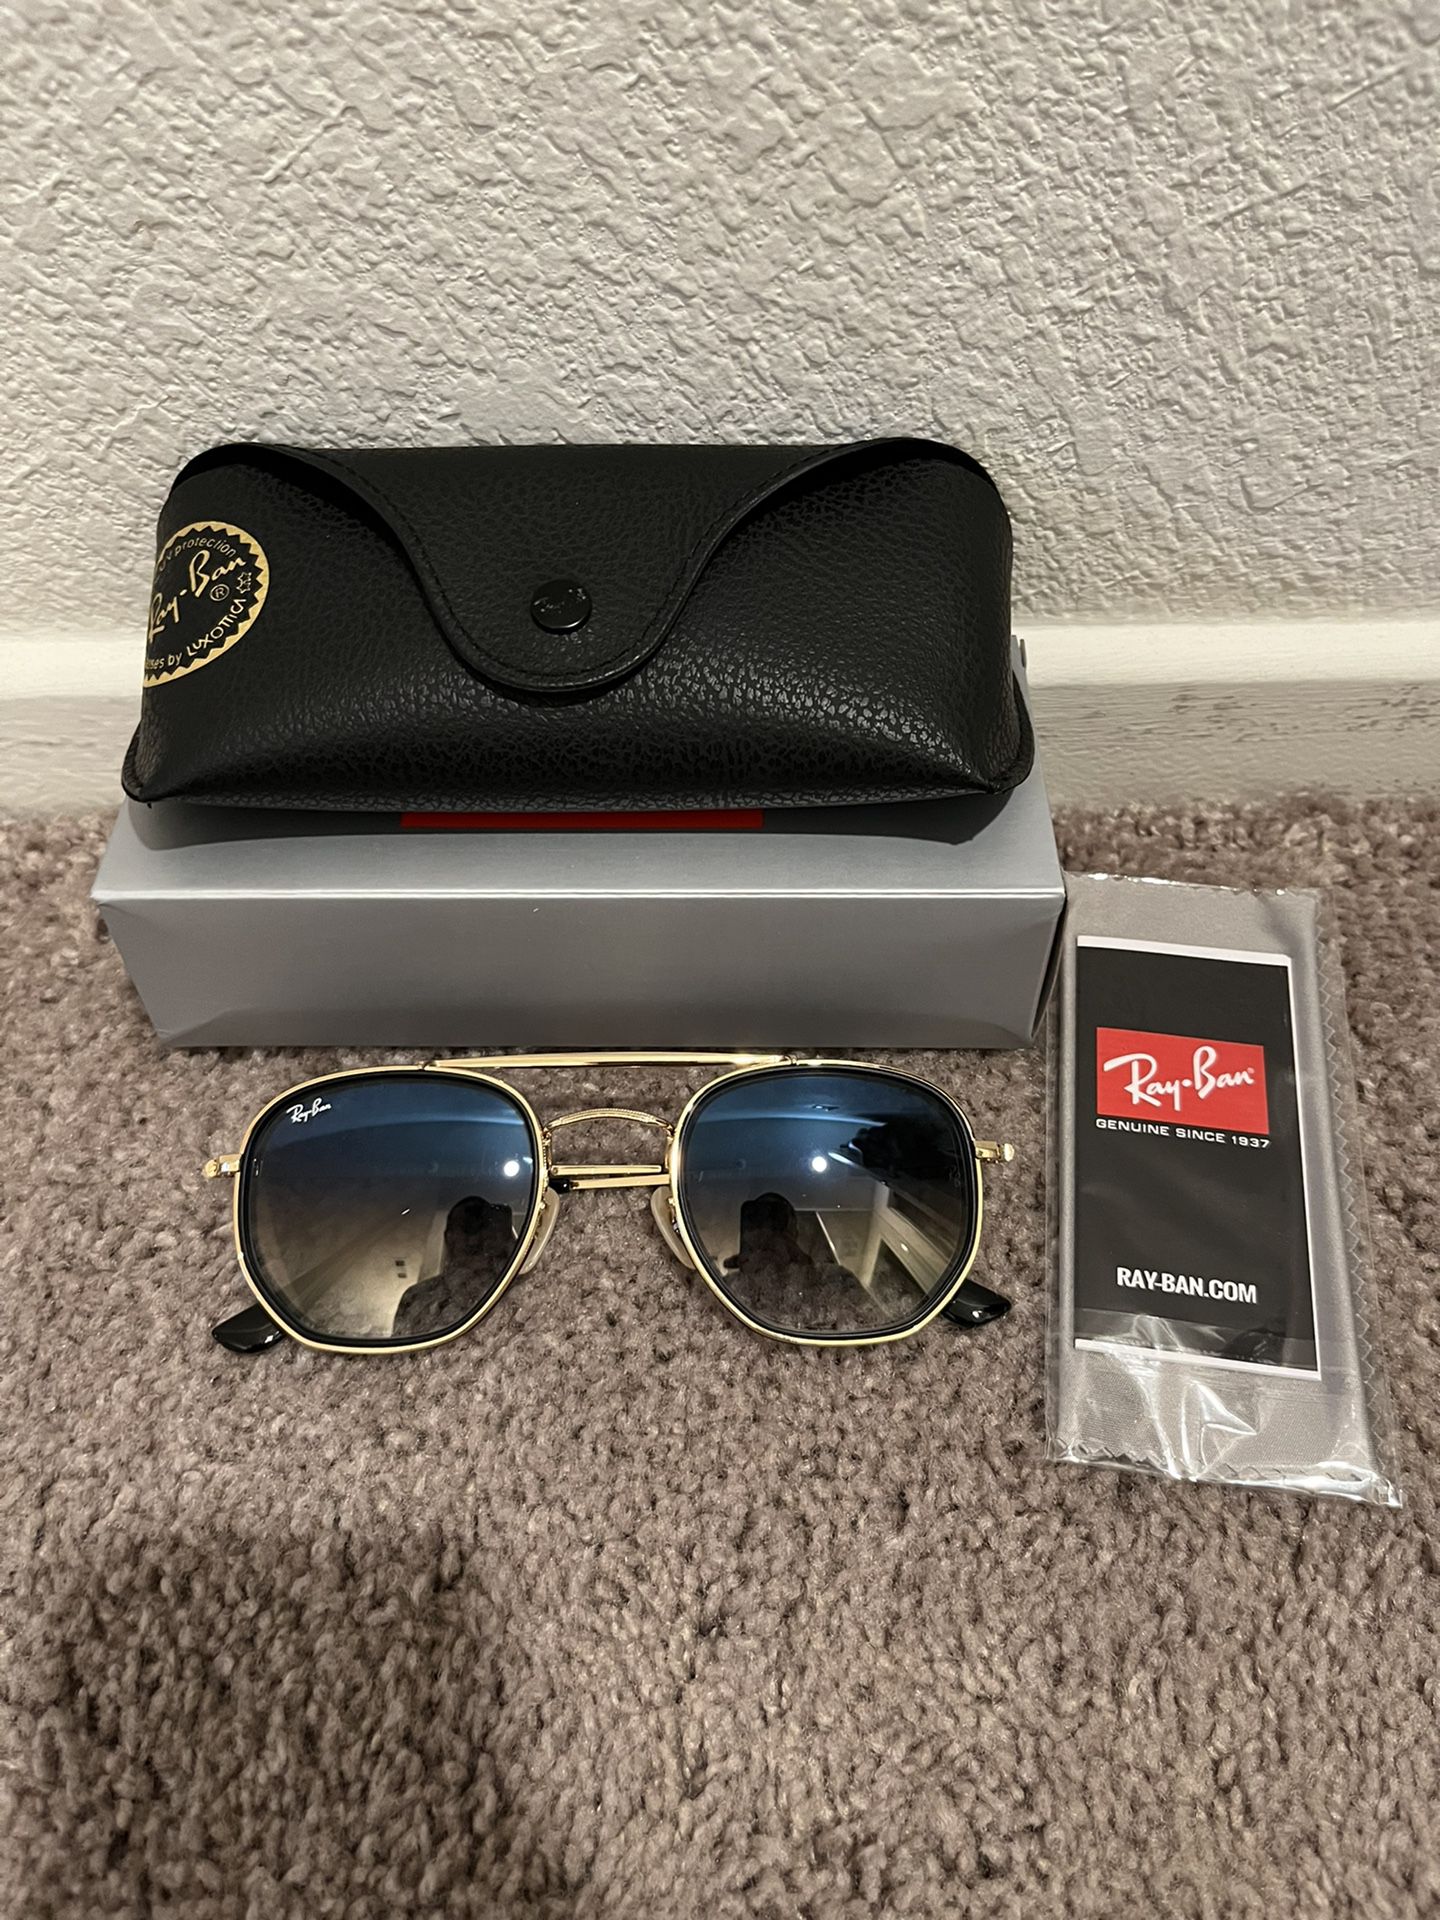 Ray Ban Marshal II Geometric Sunglasses - Gold/Black Frame - Blue Gradient  Lens for Sale in San Diego, CA - OfferUp